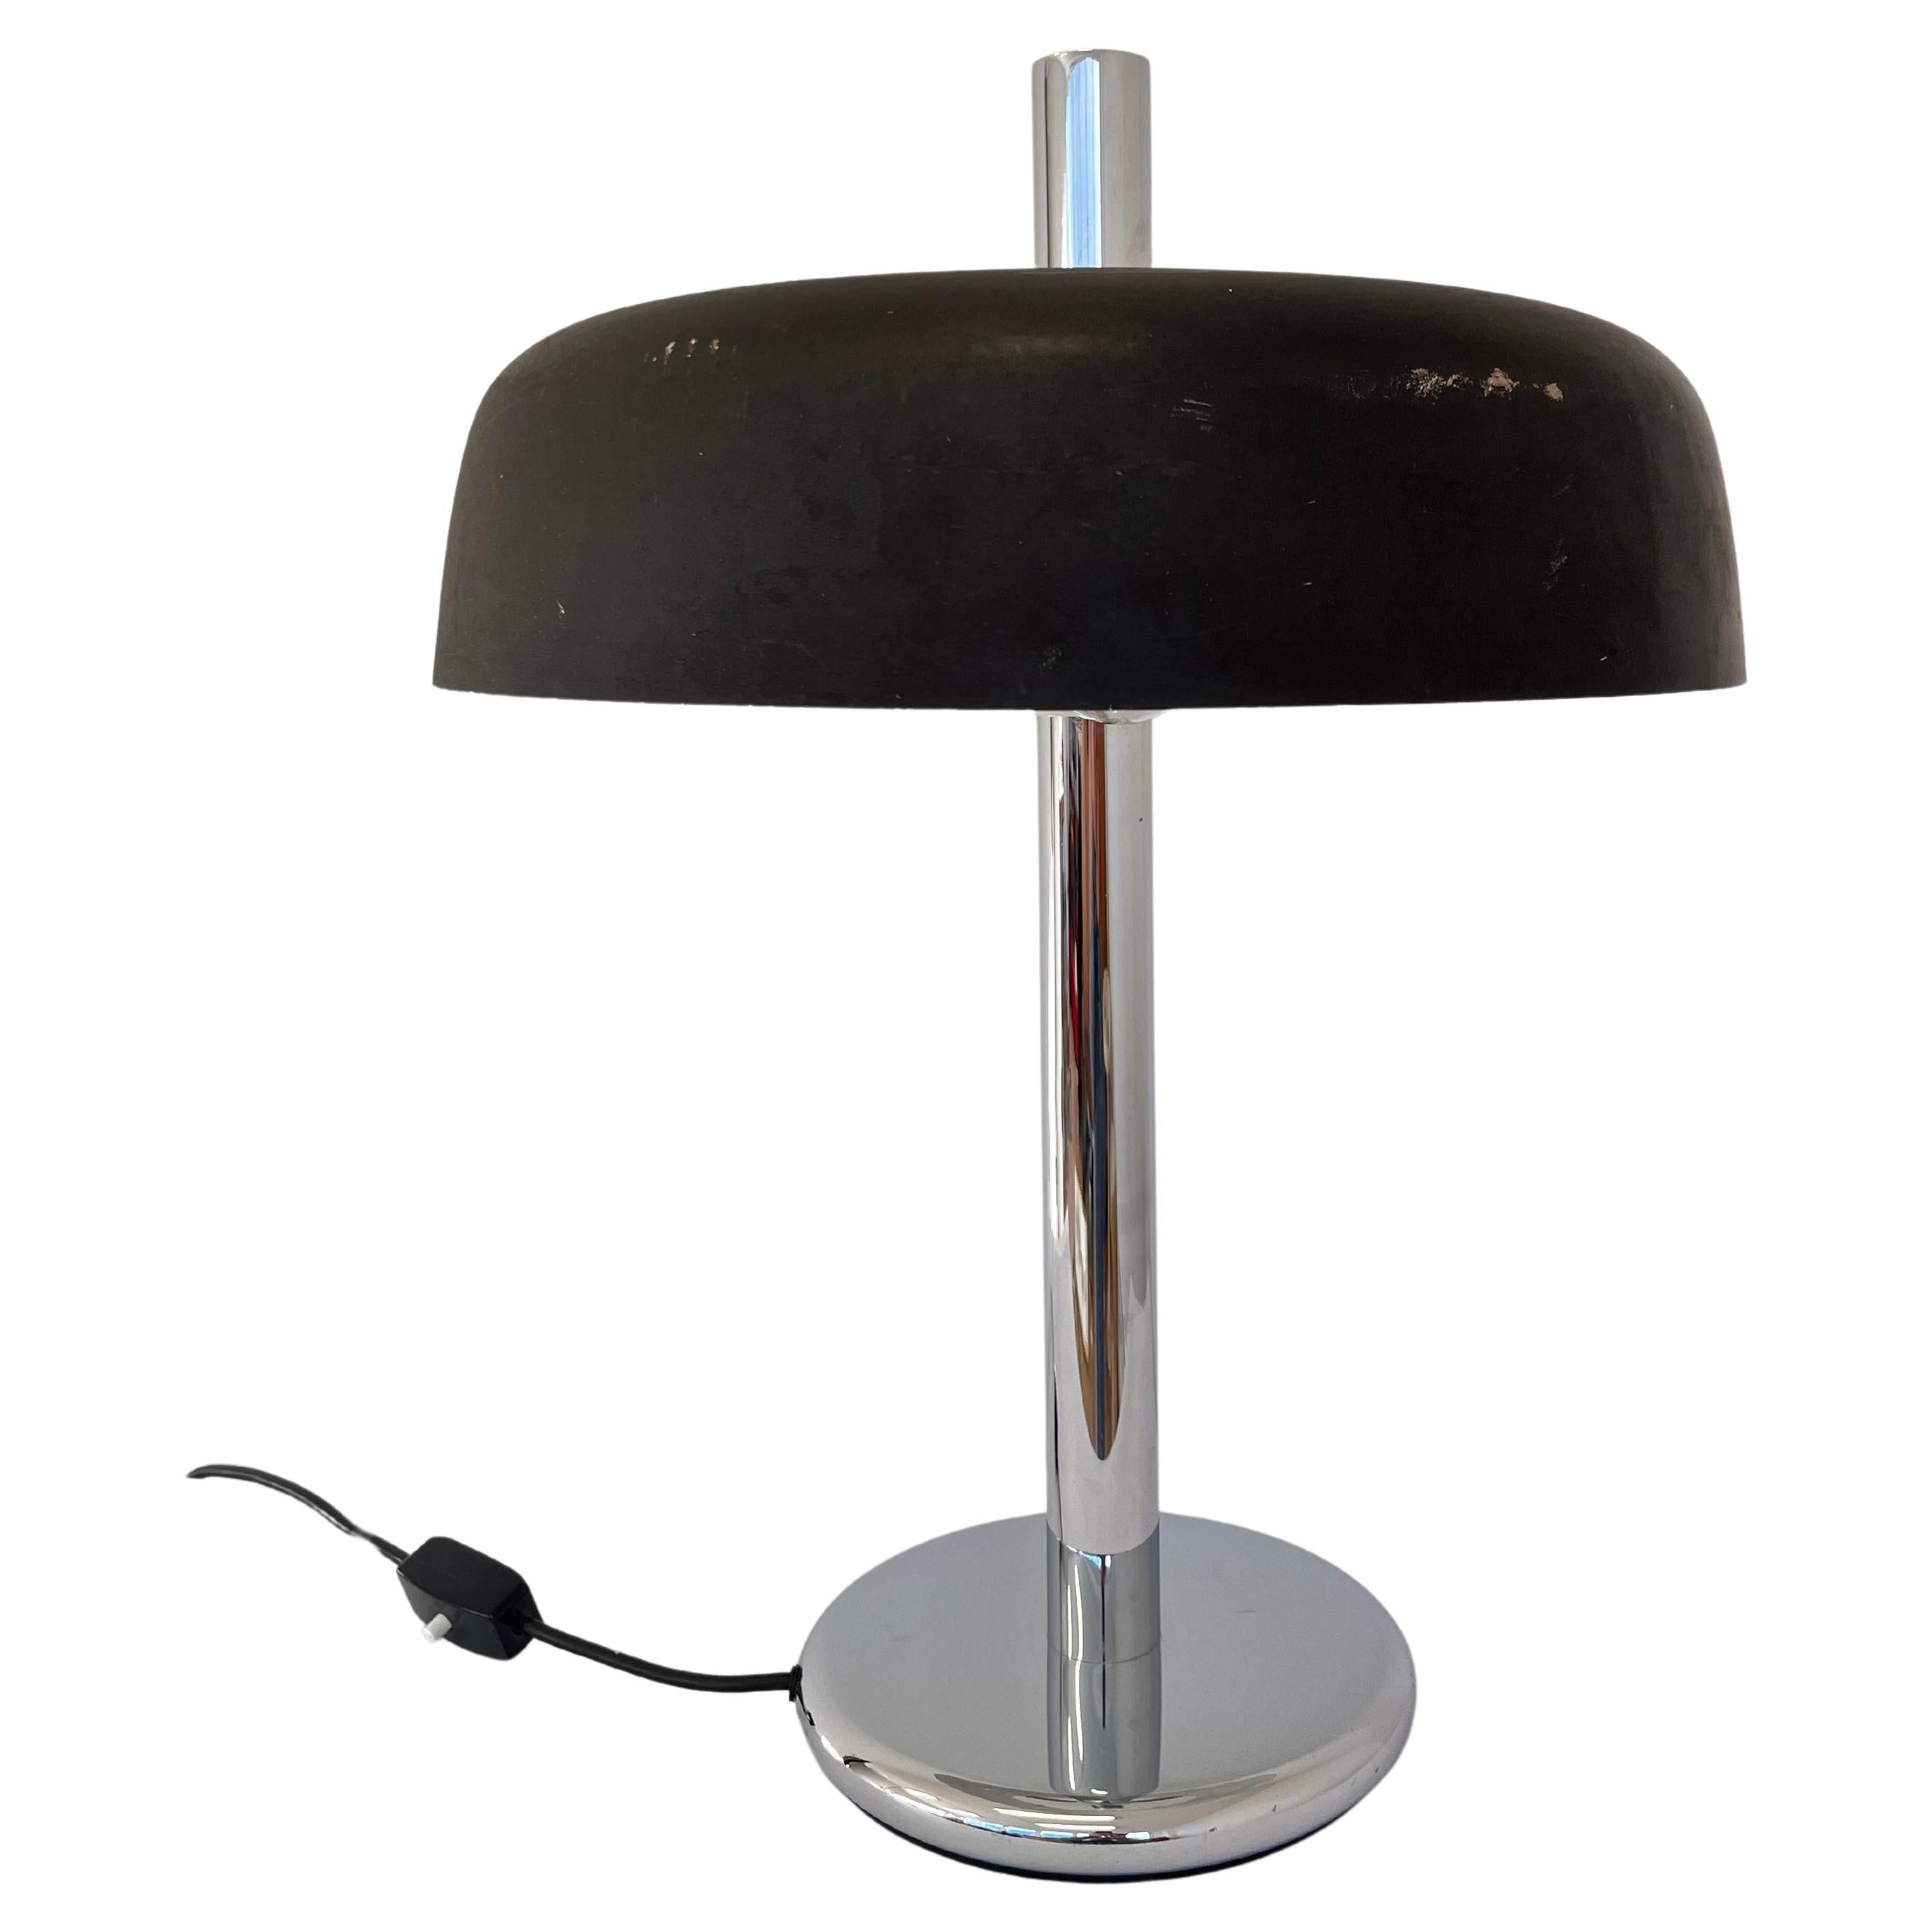 Hillebrand Table Lamps